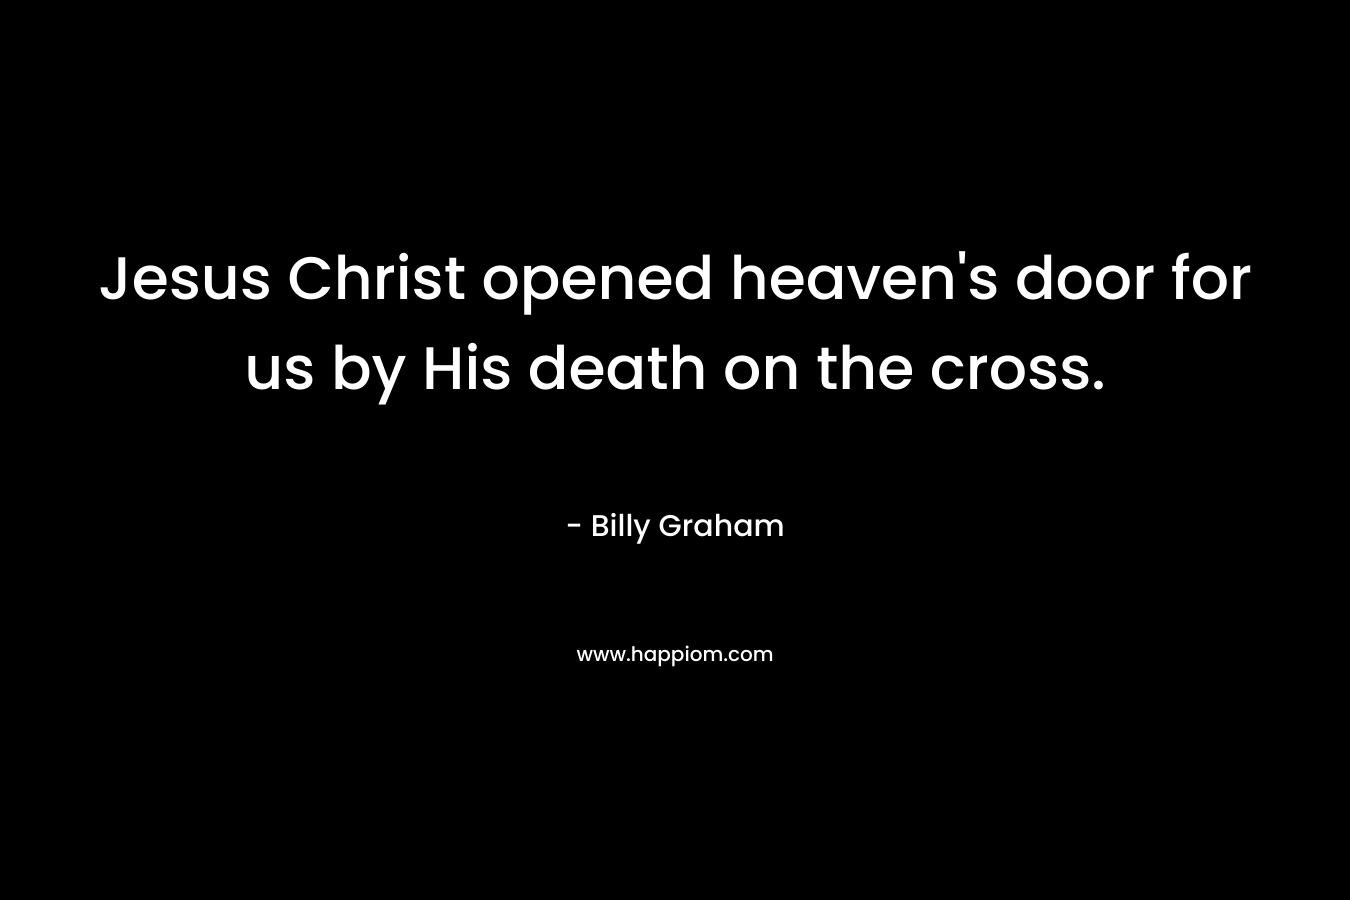 Jesus Christ opened heaven's door for us by His death on the cross.